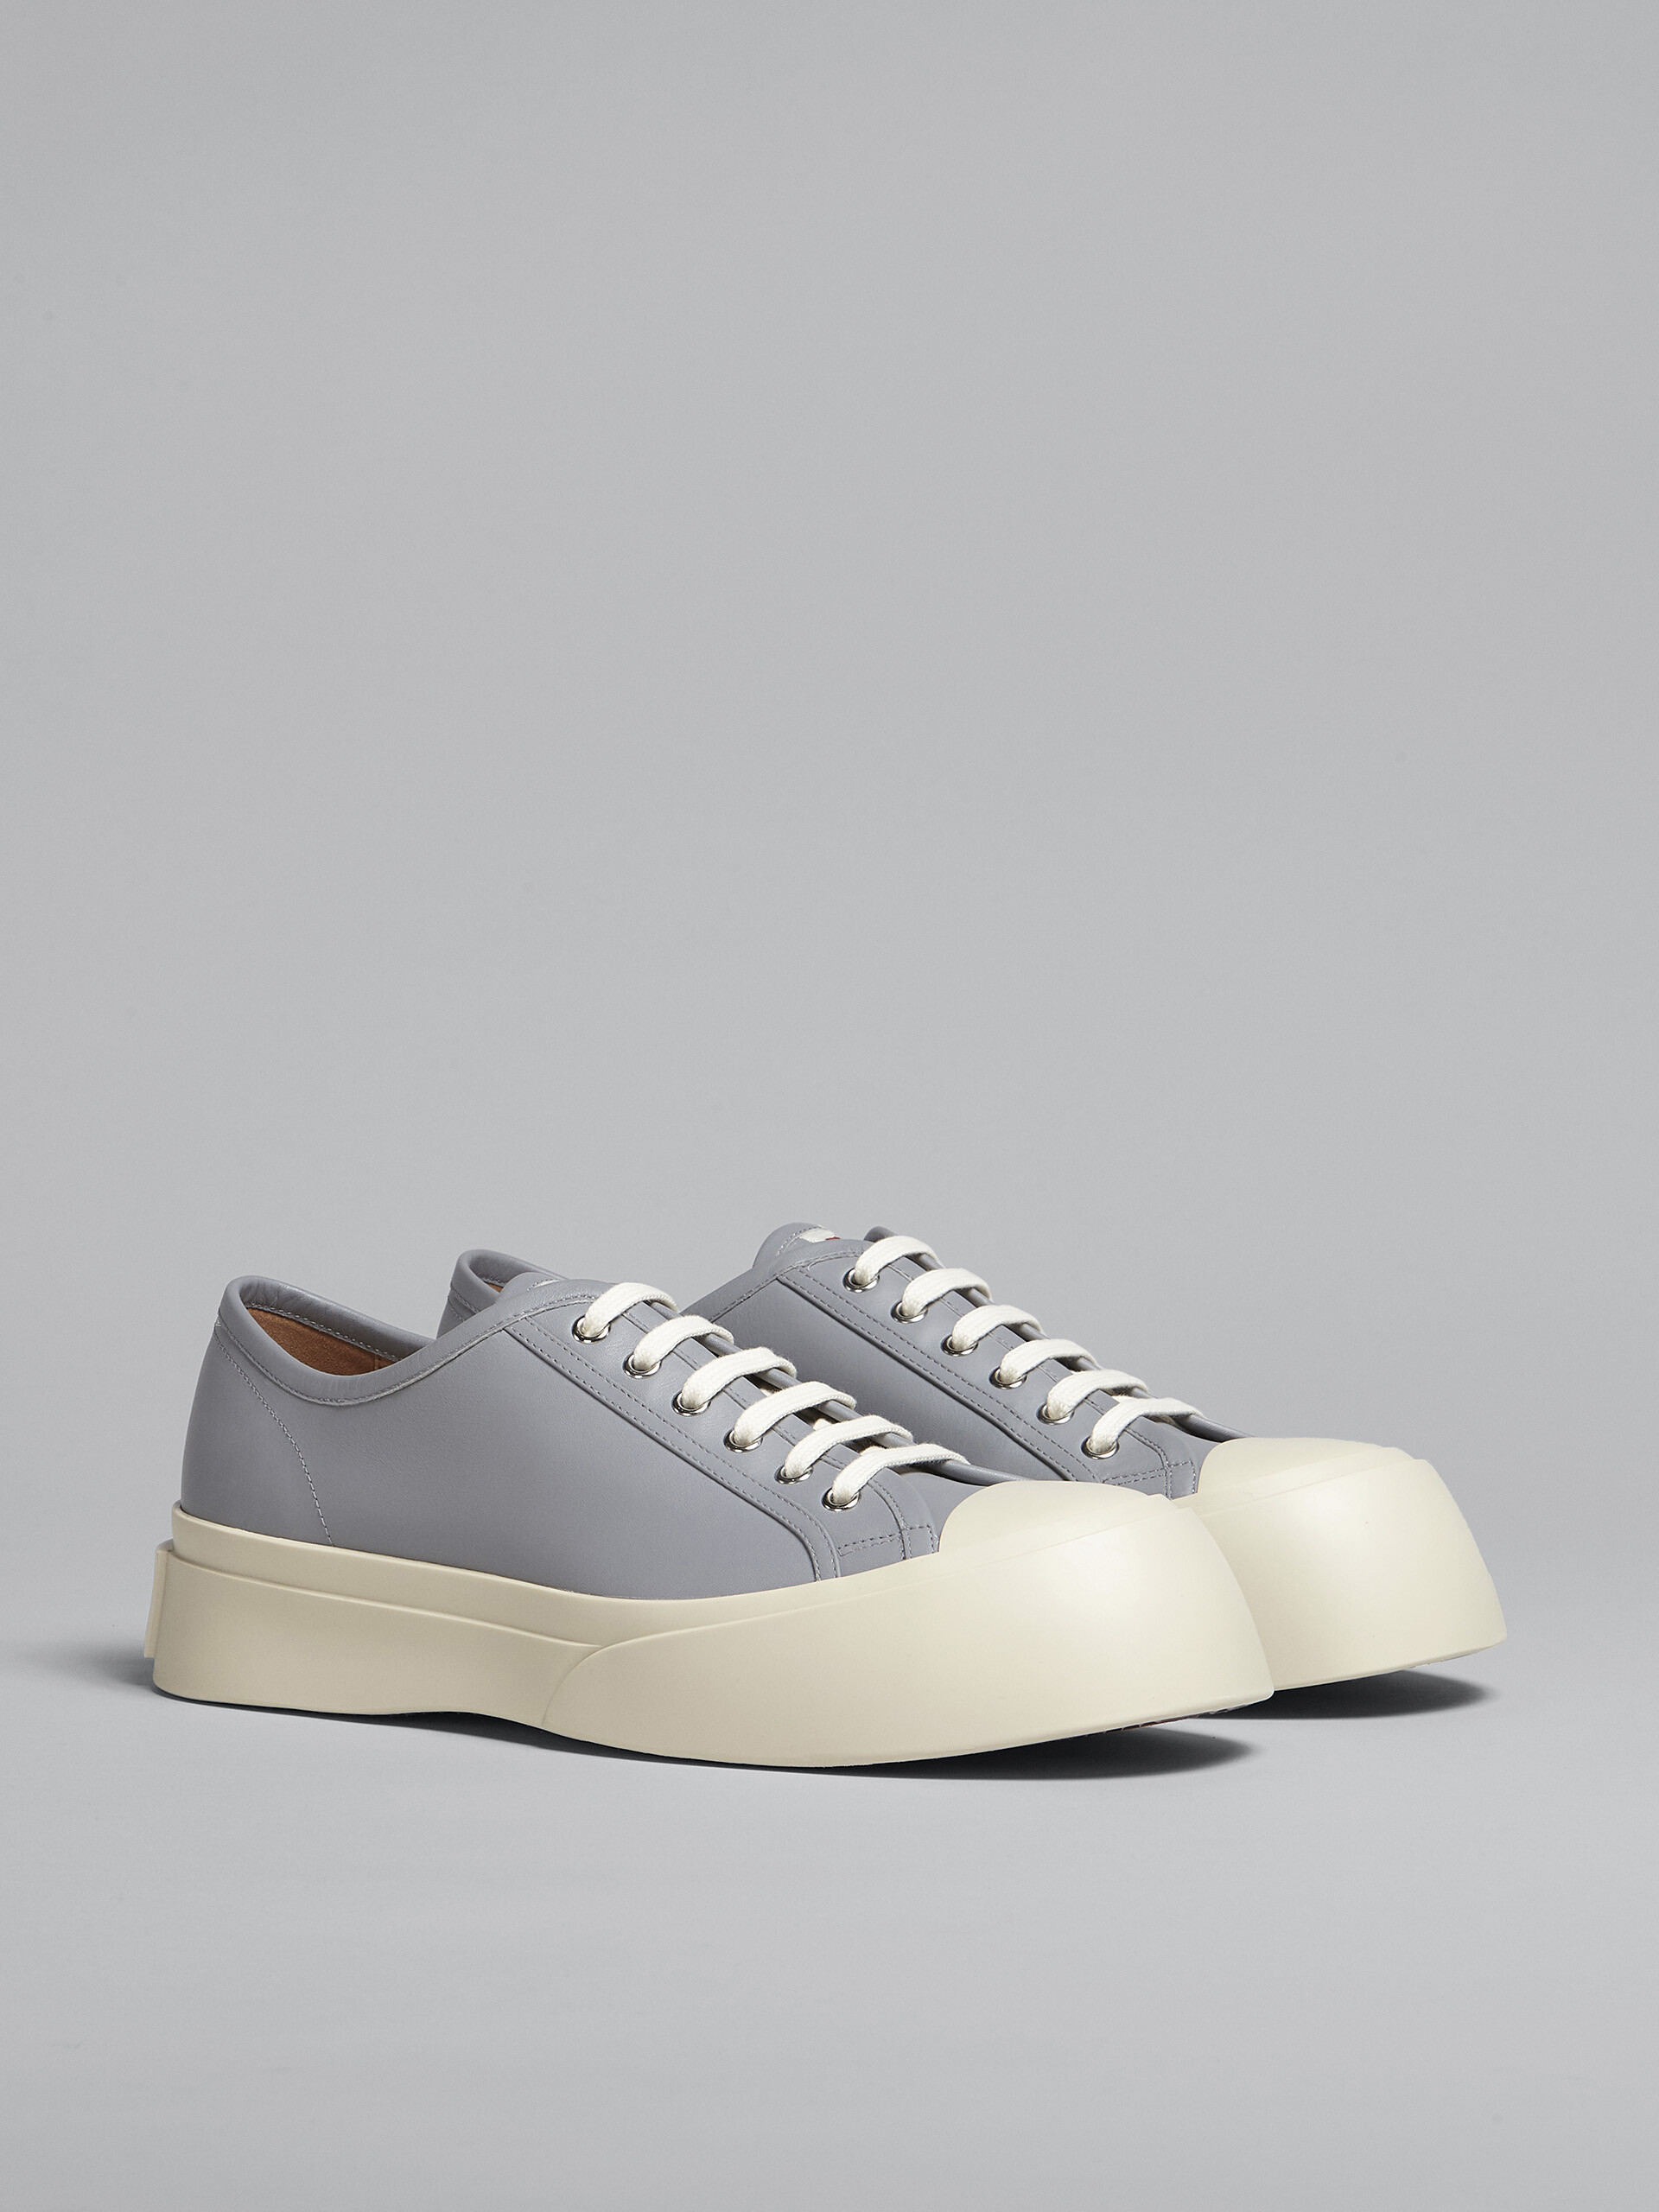 Blue nappa leather Pablo sneaker - Sneakers - Image 2